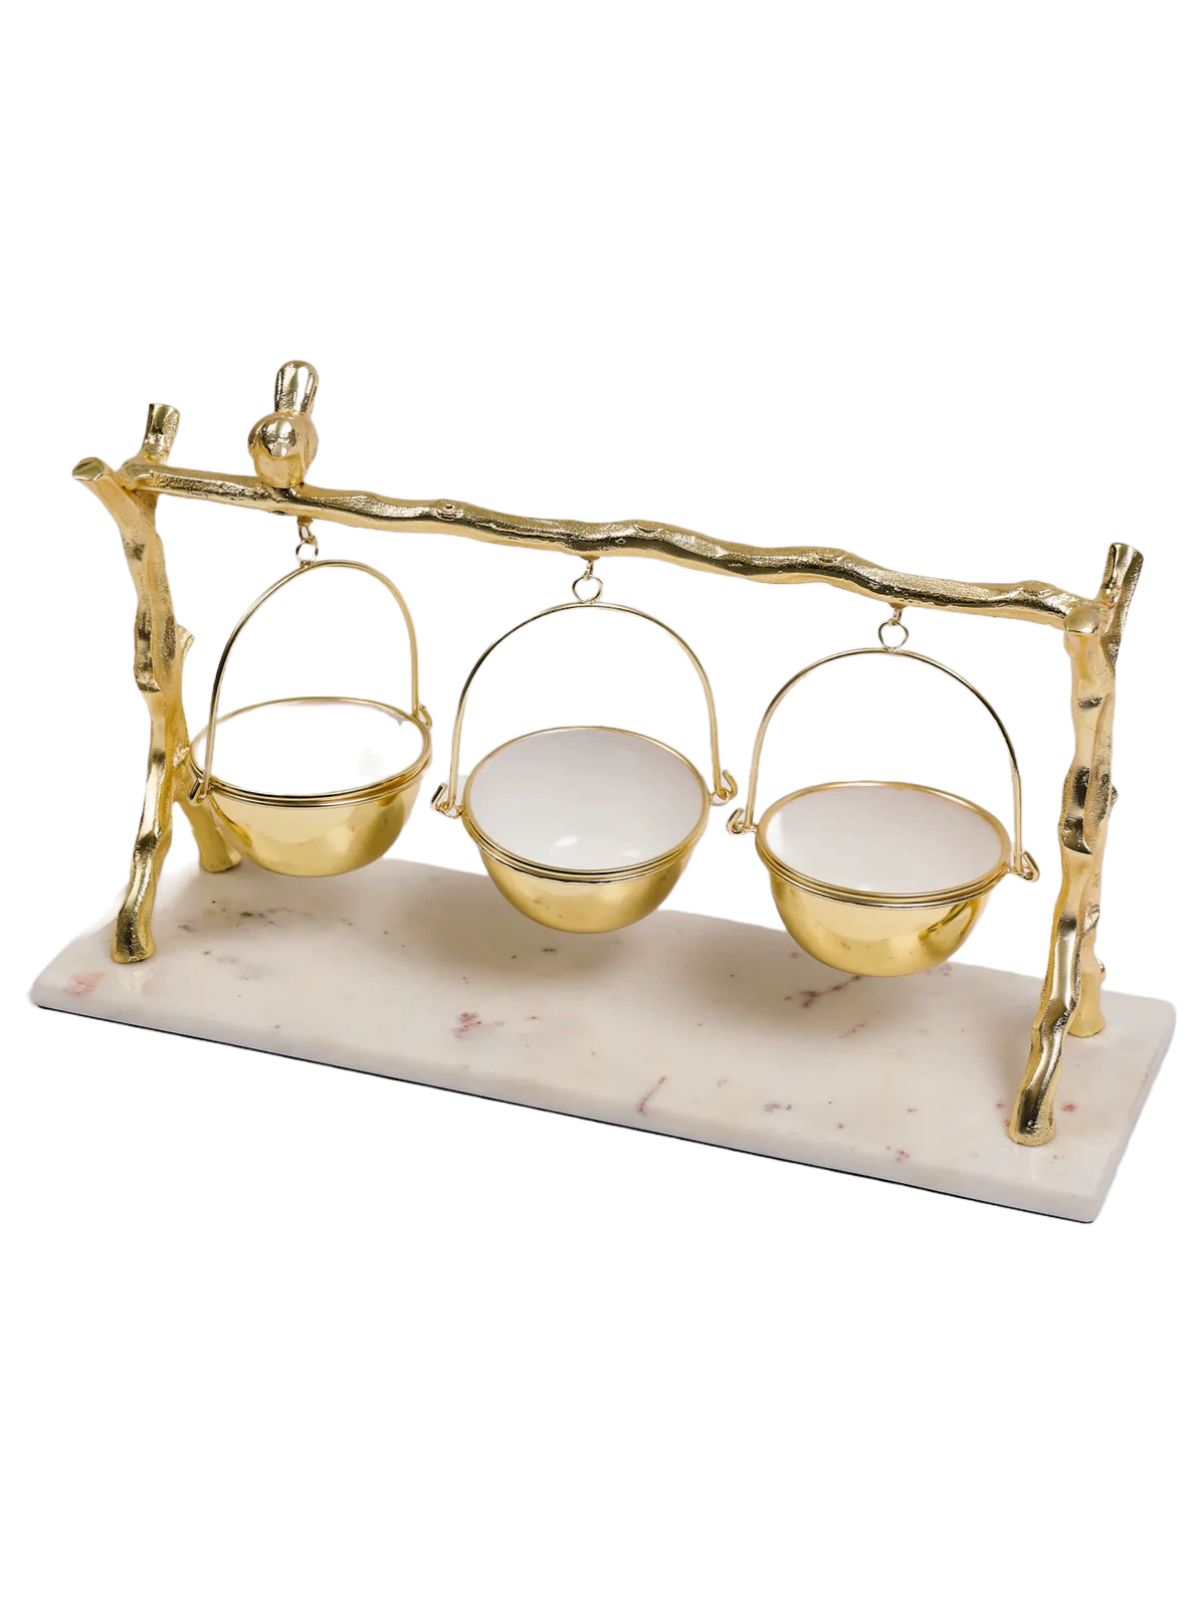 Marble Tray with 3 Hanging Bowls From Gold Stainless Steel Bamboo Designed Frame with Bird on Top.